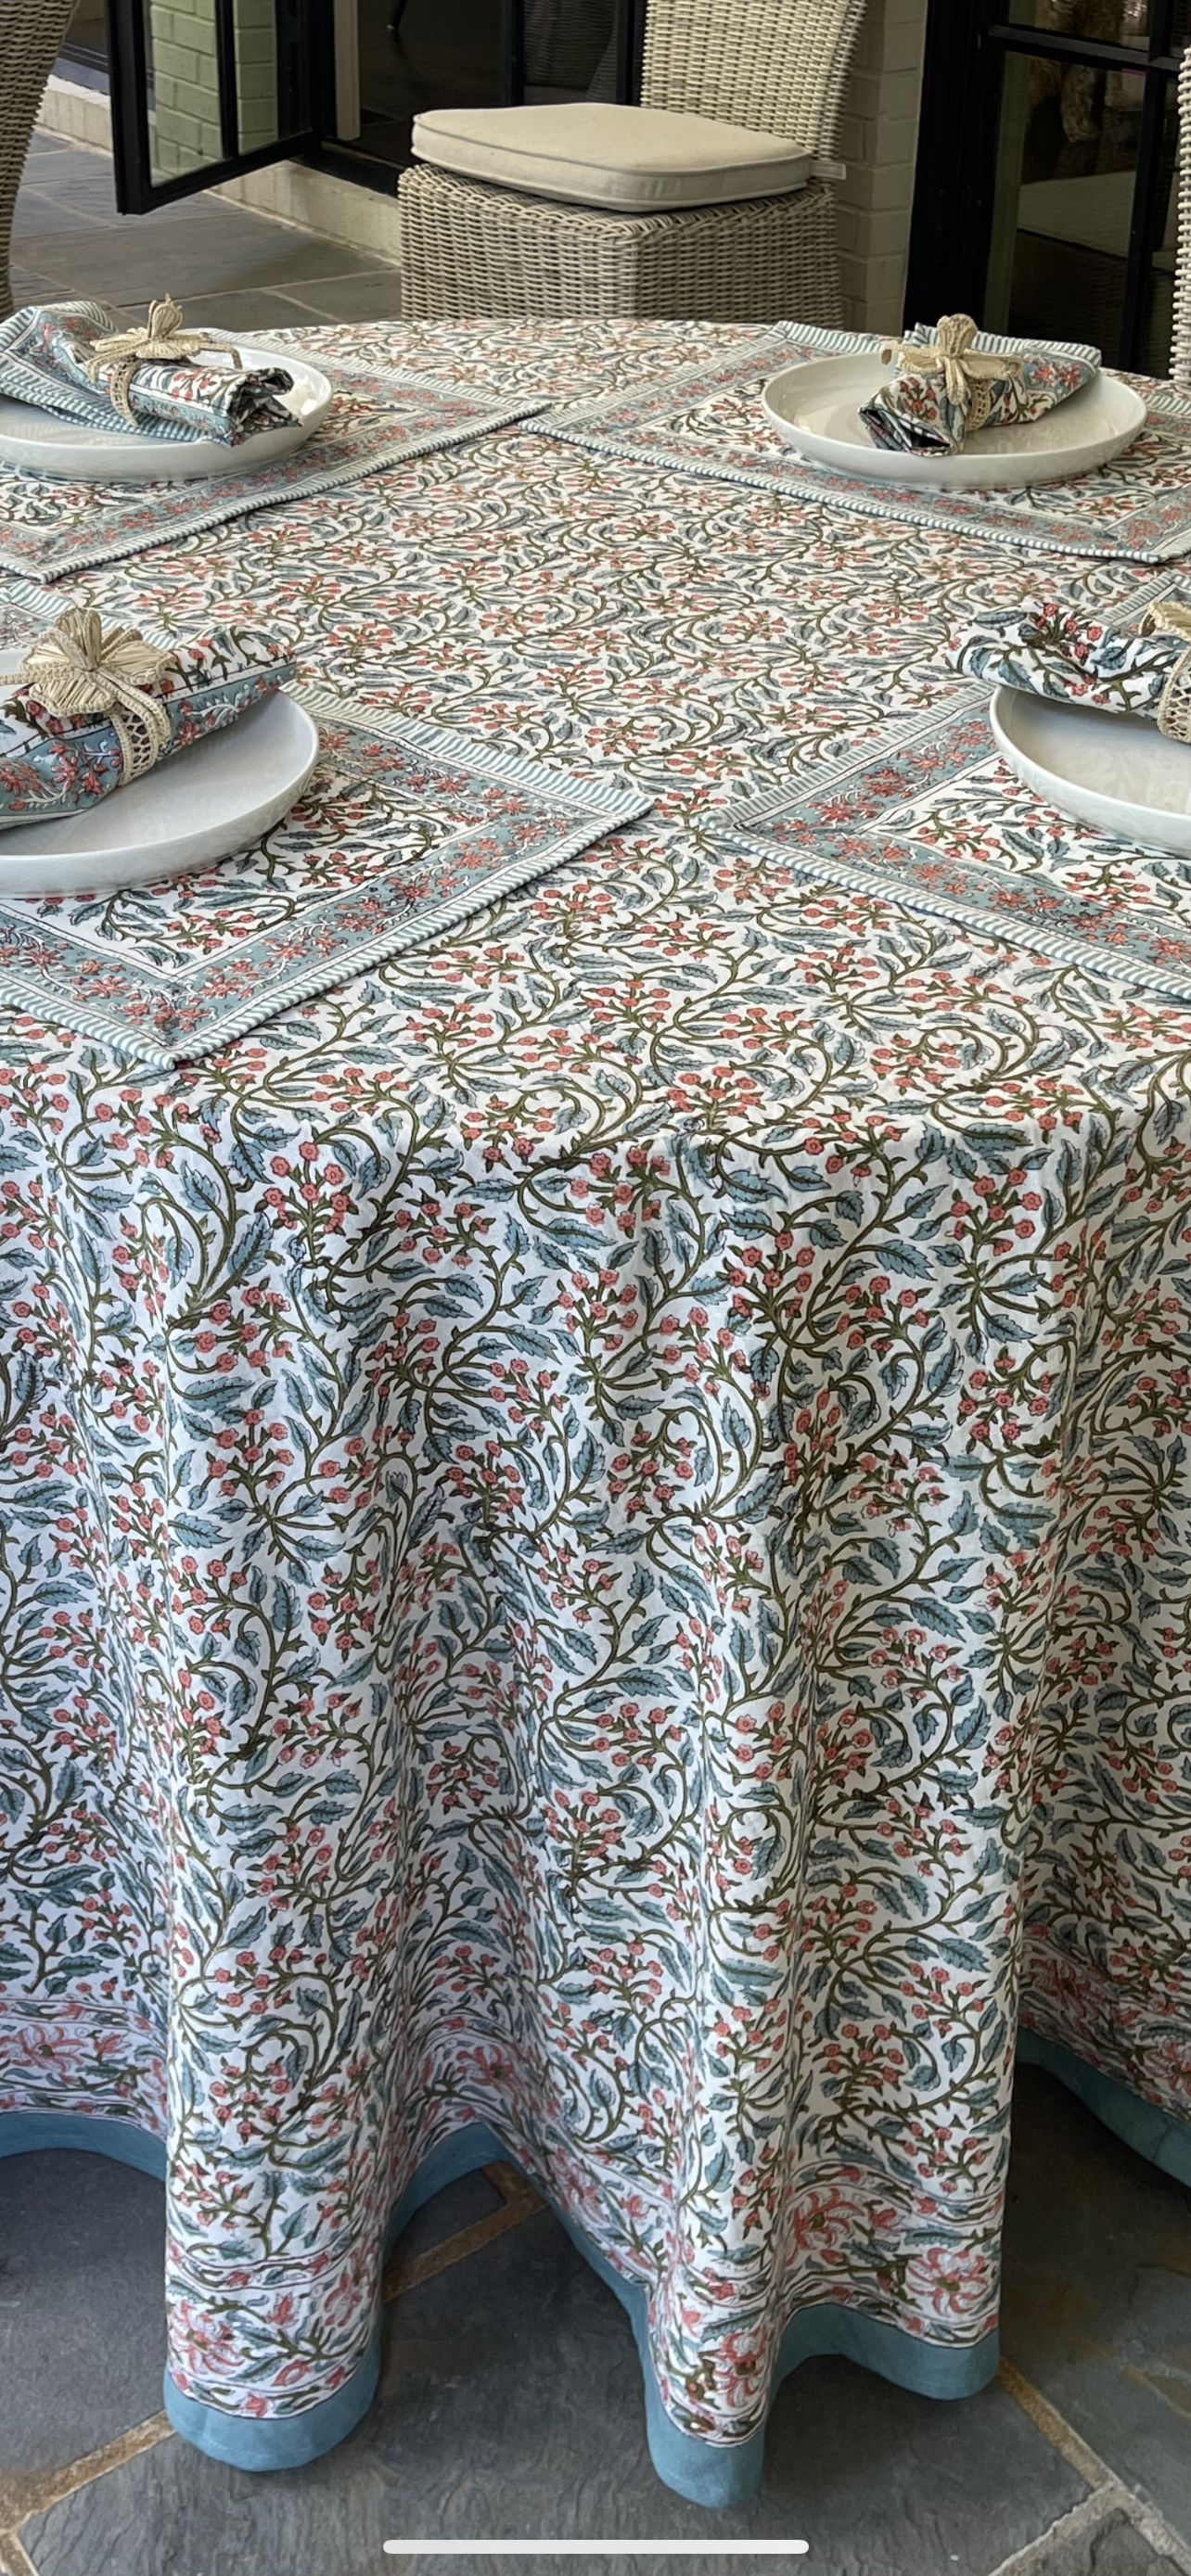 Provence Round Tablecloth 108”